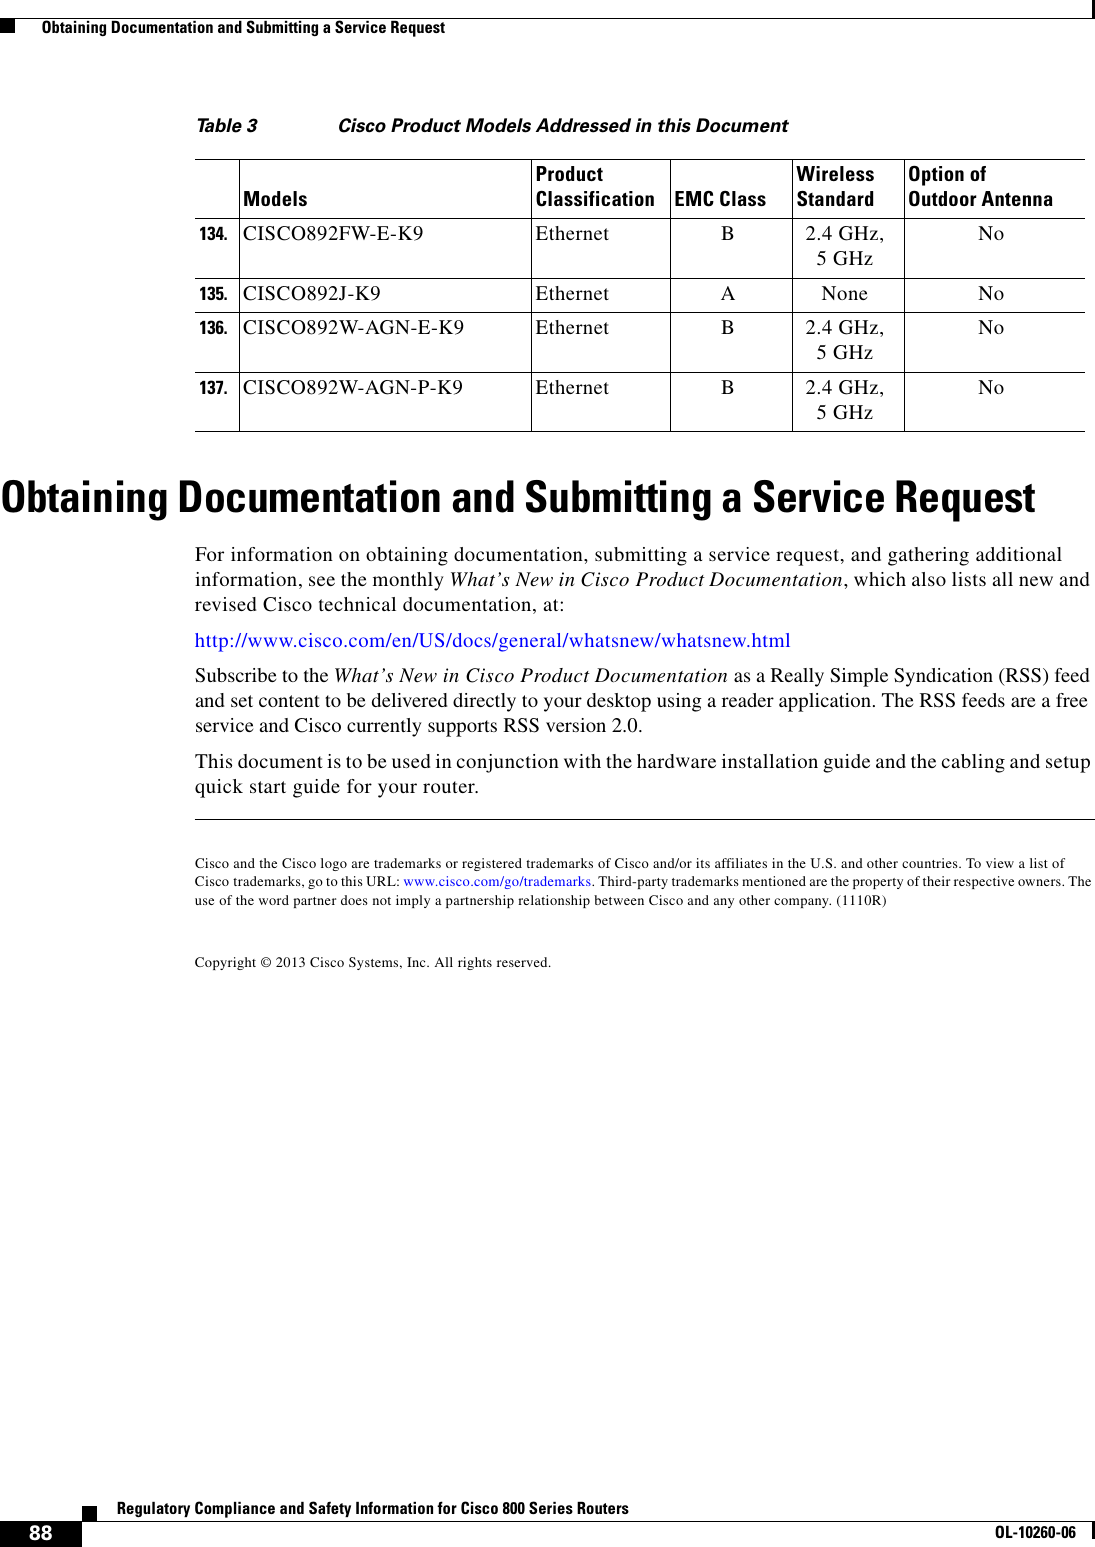 88Regulatory Compliance and Safety Information for Cisco 800 Series RoutersOL-10260-06  Obtaining Documentation and Submitting a Service RequestObtaining Documentation and Submitting a Service RequestFor information on obtaining documentation, submitting a service request, and gathering additional information, see the monthly What’s New in Cisco Product Documentation, which also lists all new and revised Cisco technical documentation, at:http://www.cisco.com/en/US/docs/general/whatsnew/whatsnew.htmlSubscribe to the What’s New in Cisco Product Documentation as a Really Simple Syndication (RSS) feed and set content to be delivered directly to your desktop using a reader application. The RSS feeds are a free service and Cisco currently supports RSS version 2.0. This document is to be used in conjunction with the hardware installation guide and the cabling and setup quick start guide for your router.Cisco and the Cisco logo are trademarks or registered trademarks of Cisco and/or its affiliates in the U.S. and other countries. To view a list of Cisco trademarks, go to this URL: www.cisco.com/go/trademarks. Third-party trademarks mentioned are the property of their respective owners. The use of the word partner does not imply a partnership relationship between Cisco and any other company. (1110R)Copyright © 2013 Cisco Systems, Inc. All rights reserved.134. CISCO892FW-E-K9 Ethernet B2.4 GHz, 5 GHz No135. CISCO892J-K9 Ethernet ANone No136. CISCO892W-AGN-E-K9 Ethernet B2.4 GHz, 5 GHz No137. CISCO892W-AGN-P-K9 Ethernet B2.4 GHz, 5 GHz NoTable 3 Cisco Product Models Addressed in this DocumentModelsProduct Classification EMC ClassWireless StandardOption of  Outdoor Antenna